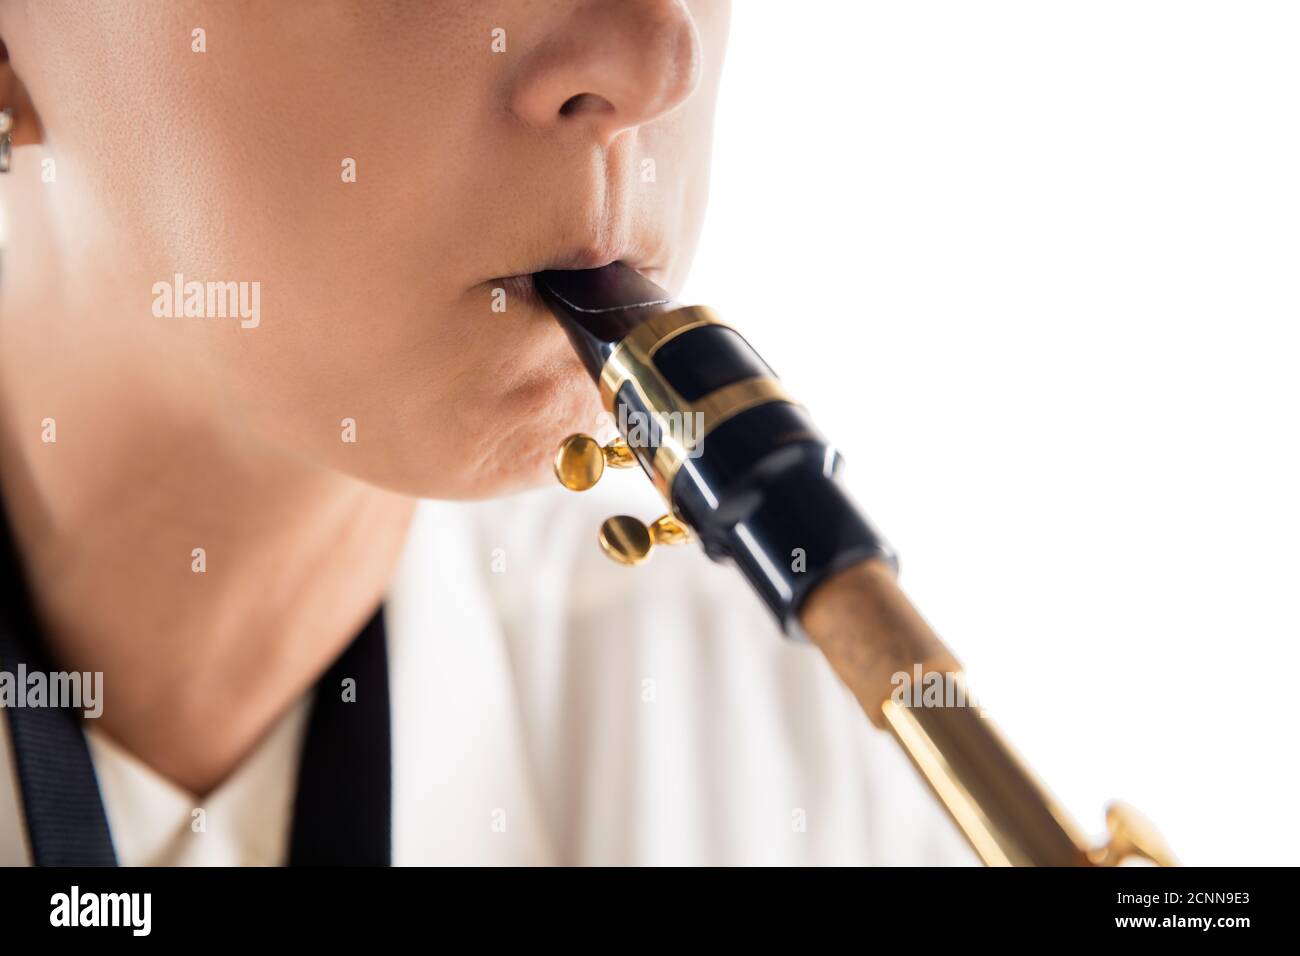 Close up woman playing saxophone isolated on white studio background. Inspired musician, details of art occupation, world classic instrument for jazz and blues. Concept of hobby, creativity. Stock Photo